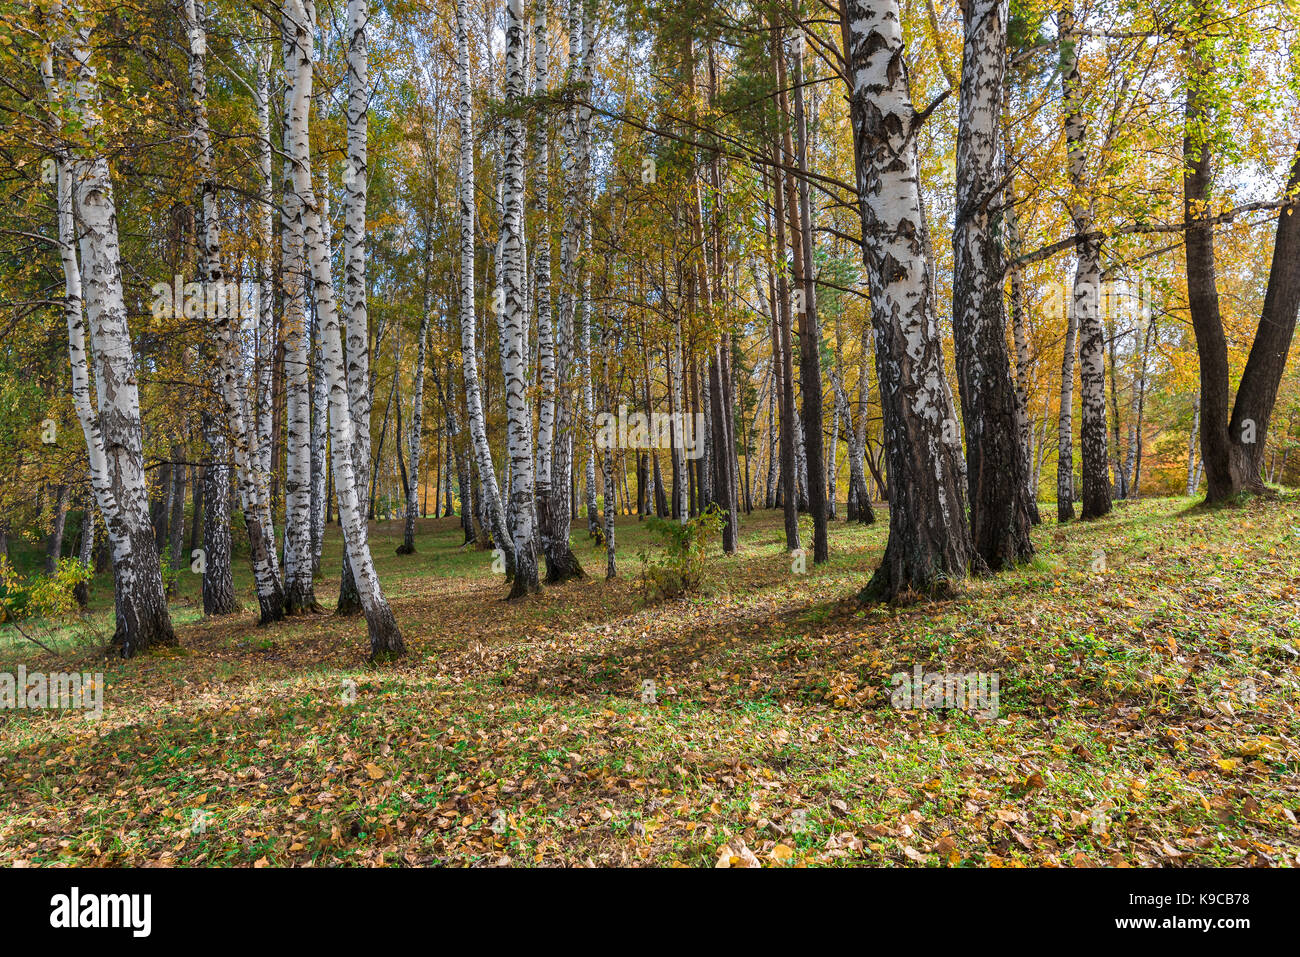 Birch grove with early autumn foliage on a sunny warm day Stock Photo